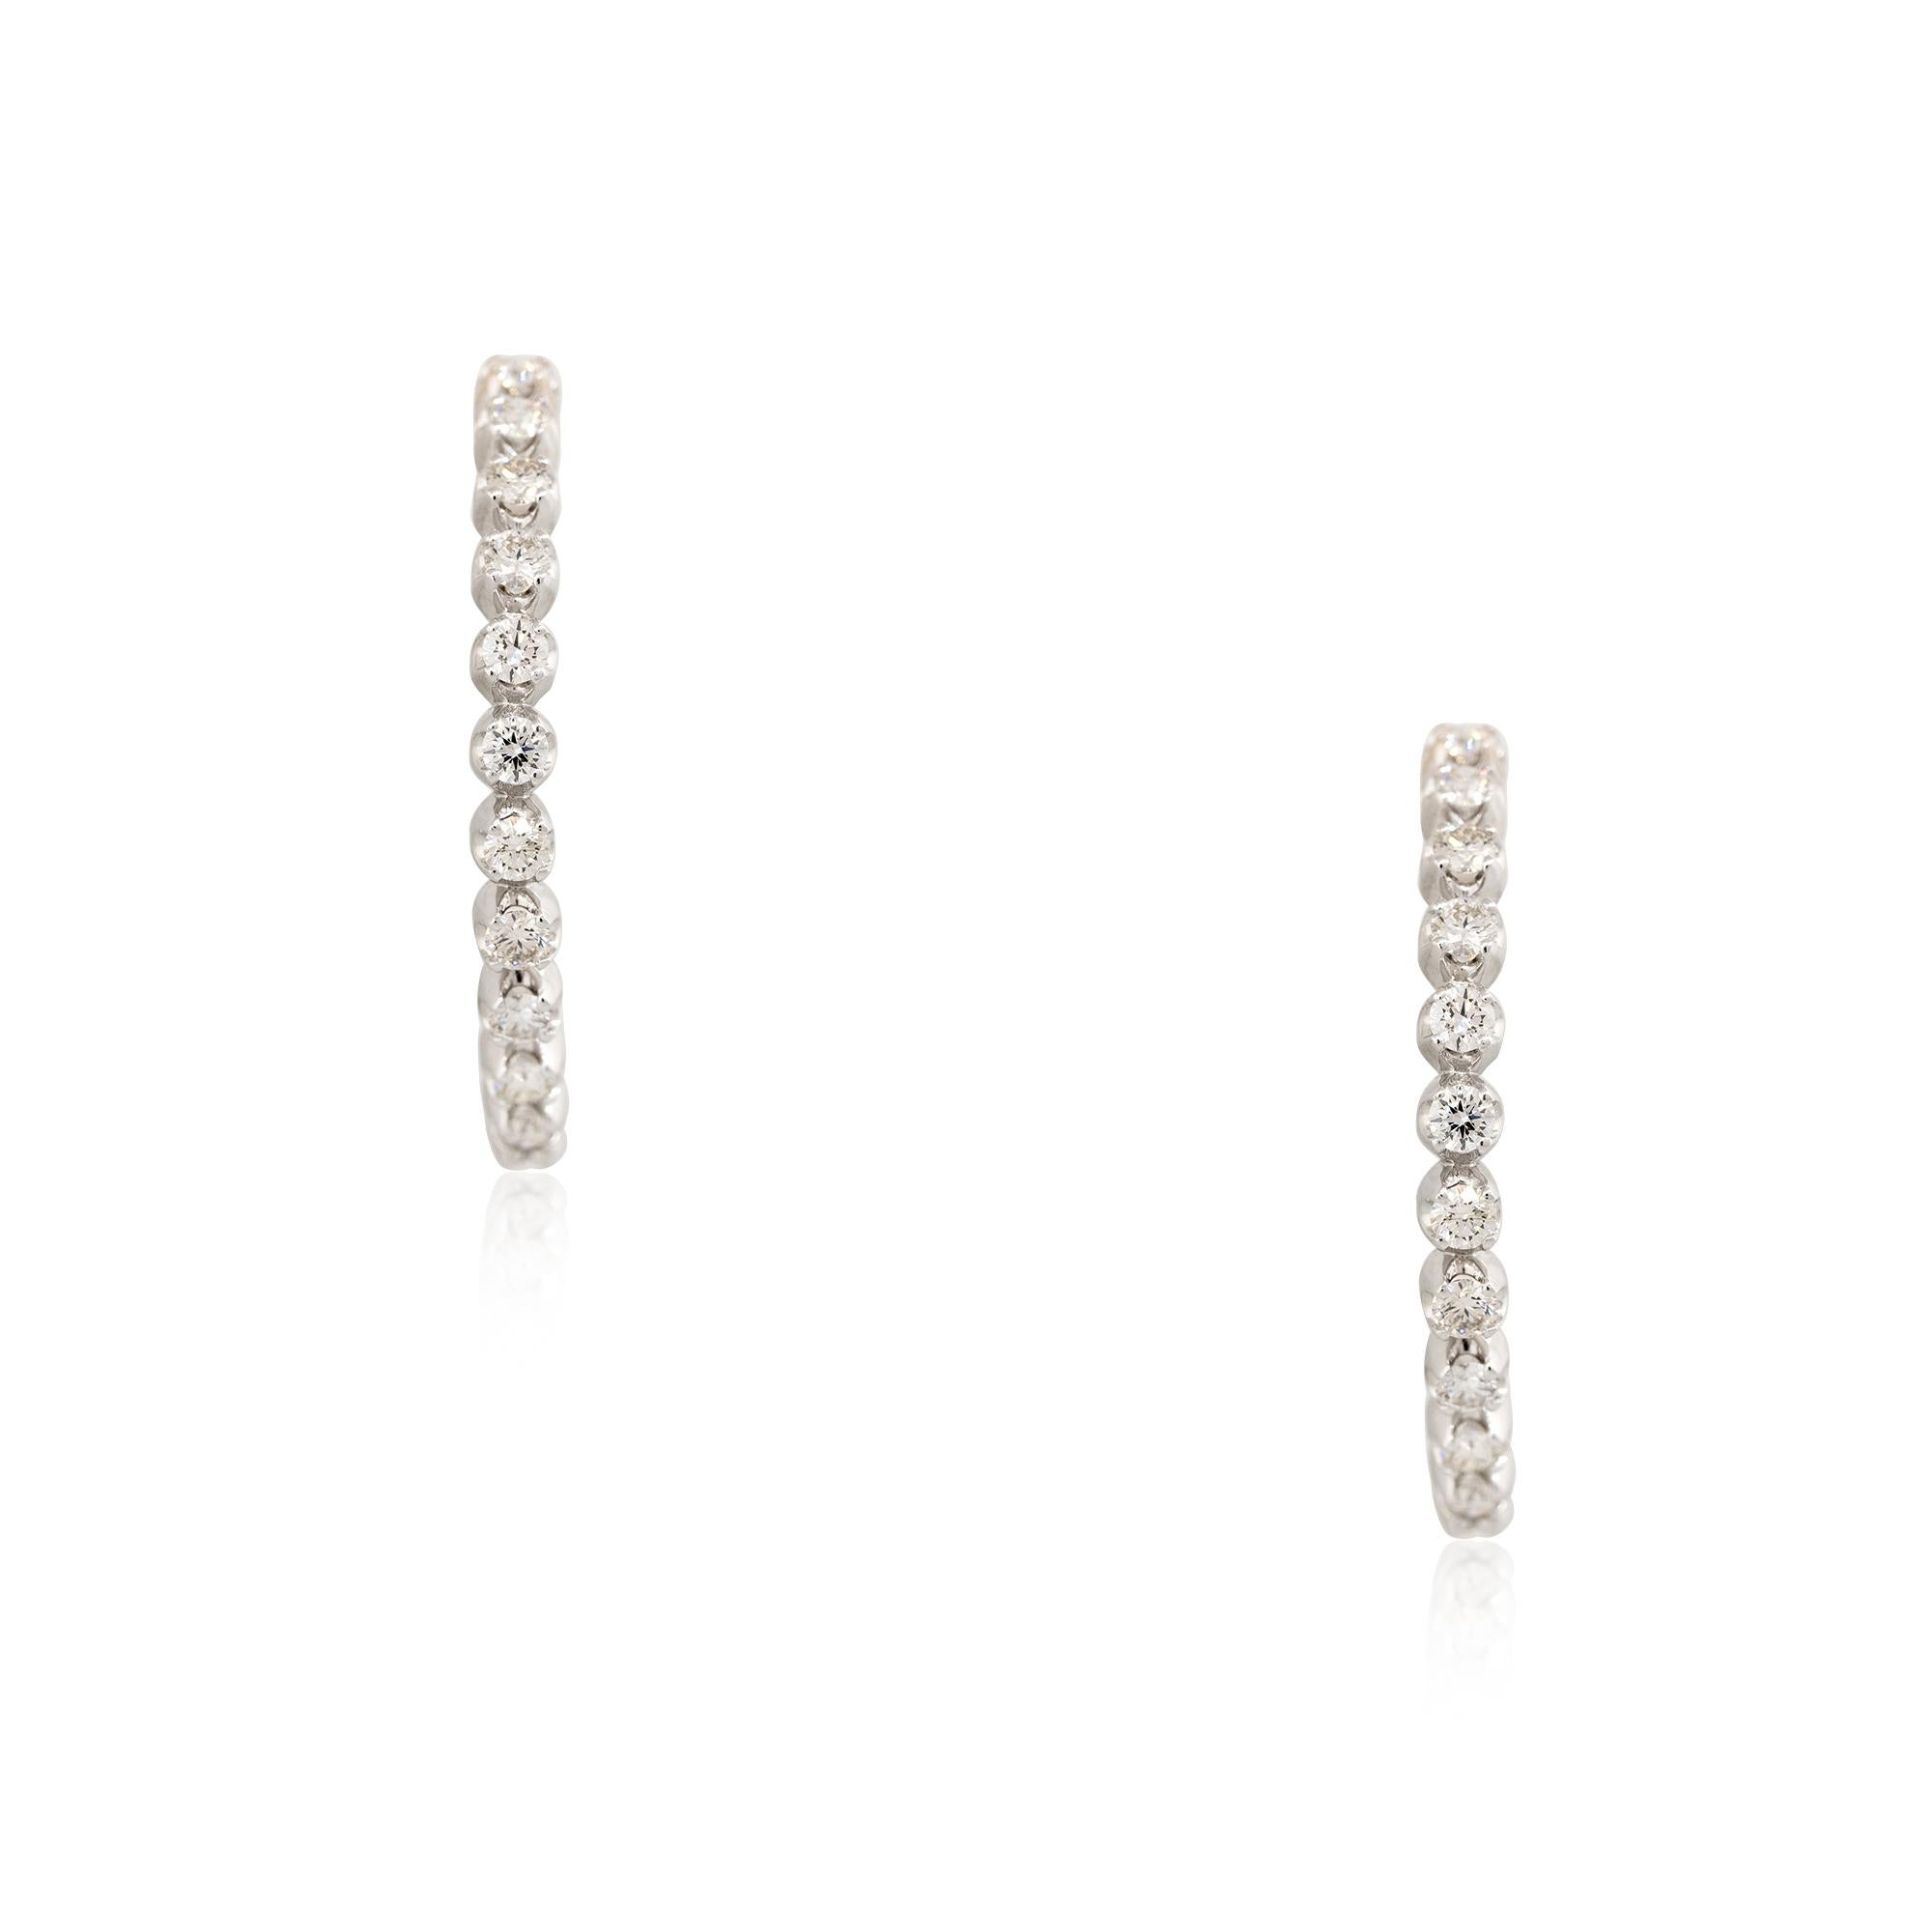 With 44 round brilliant cut diamonds, weighing approximately 5.88 carats total, this pair of inside out diamond hoops are what every woman needs! This pair of earrings would be a great addition to anyone's collection, especially someone who loves